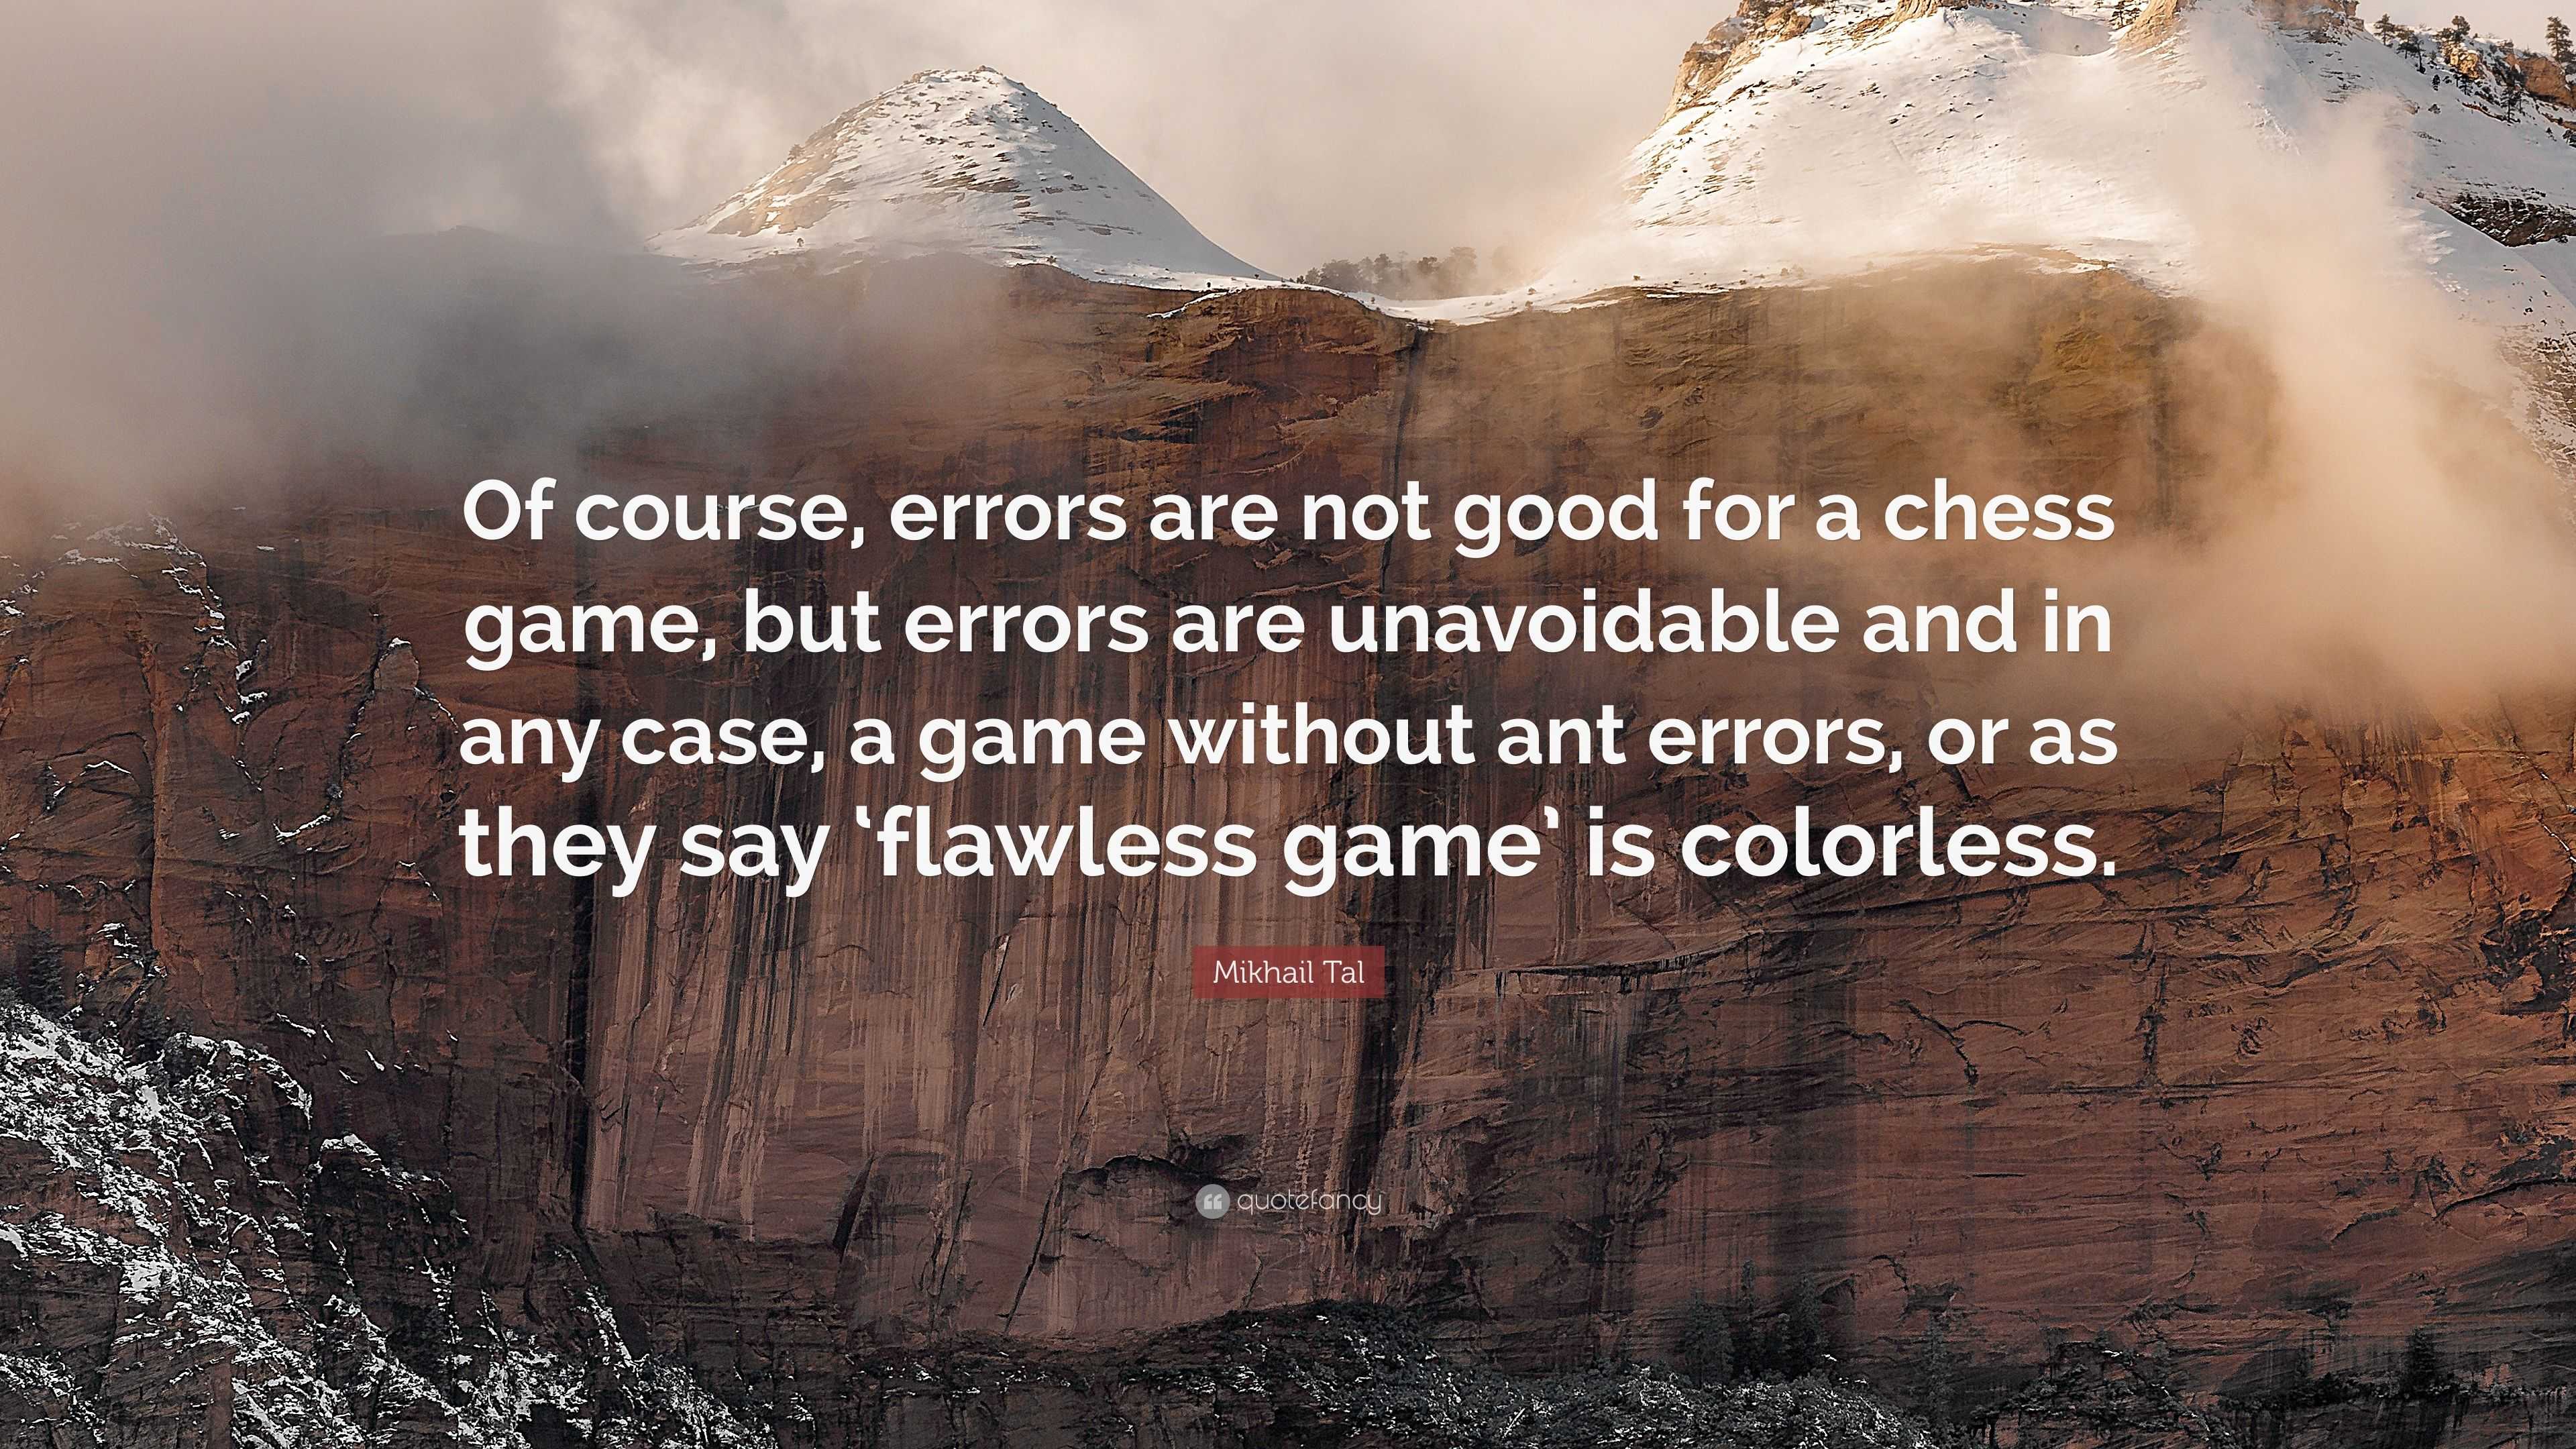 Mikhail Tal quote: Of course, errors are not good for a chess game